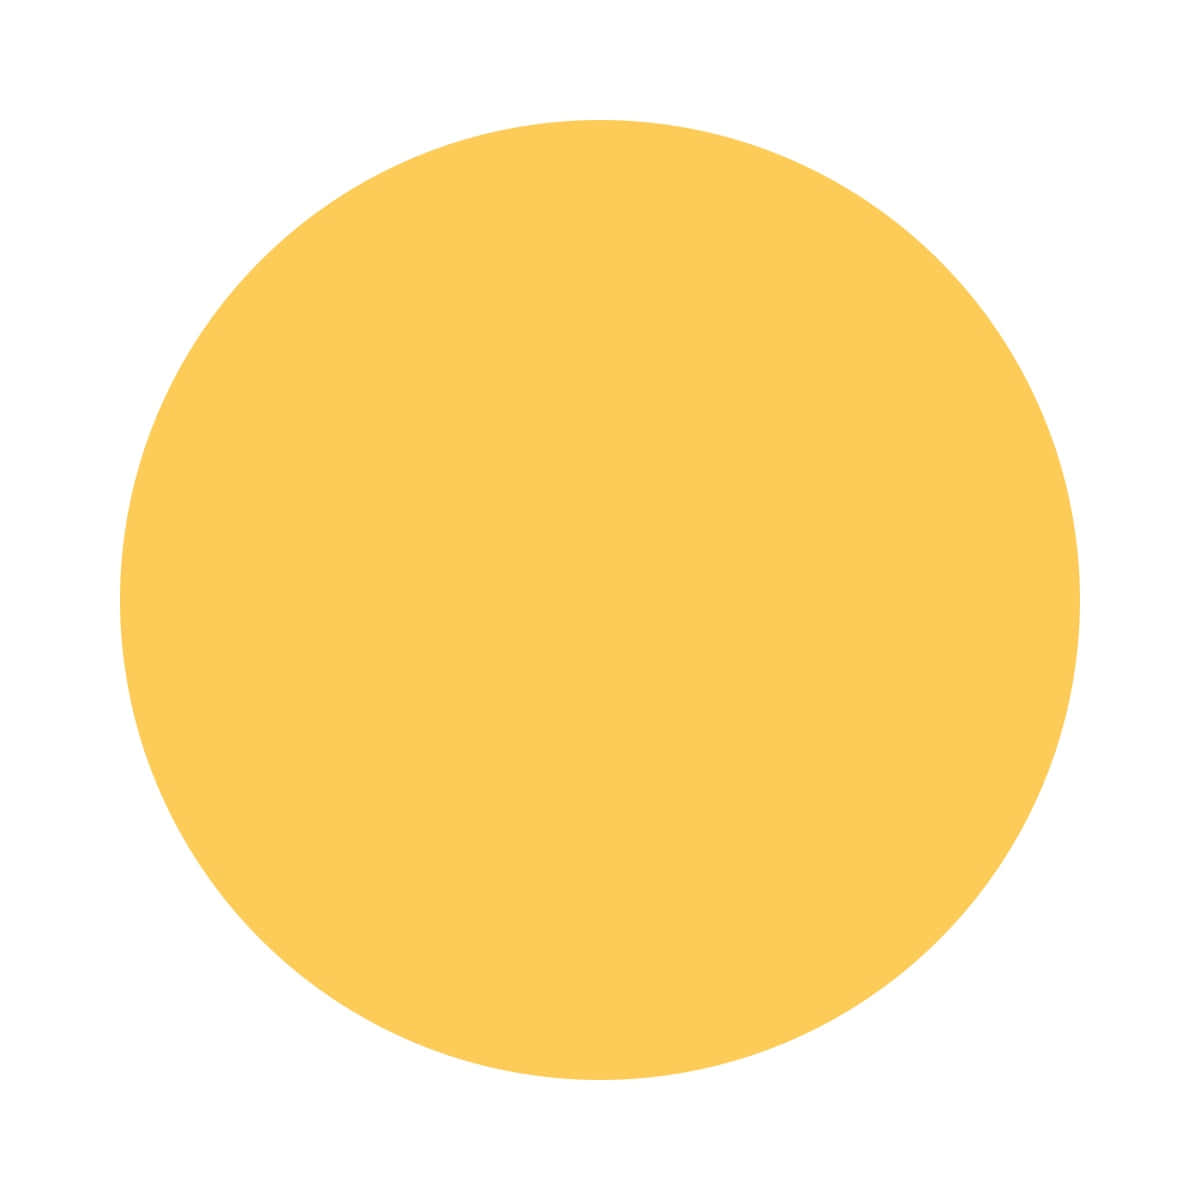 Bright Yellow Circle on a plain background Wallpaper